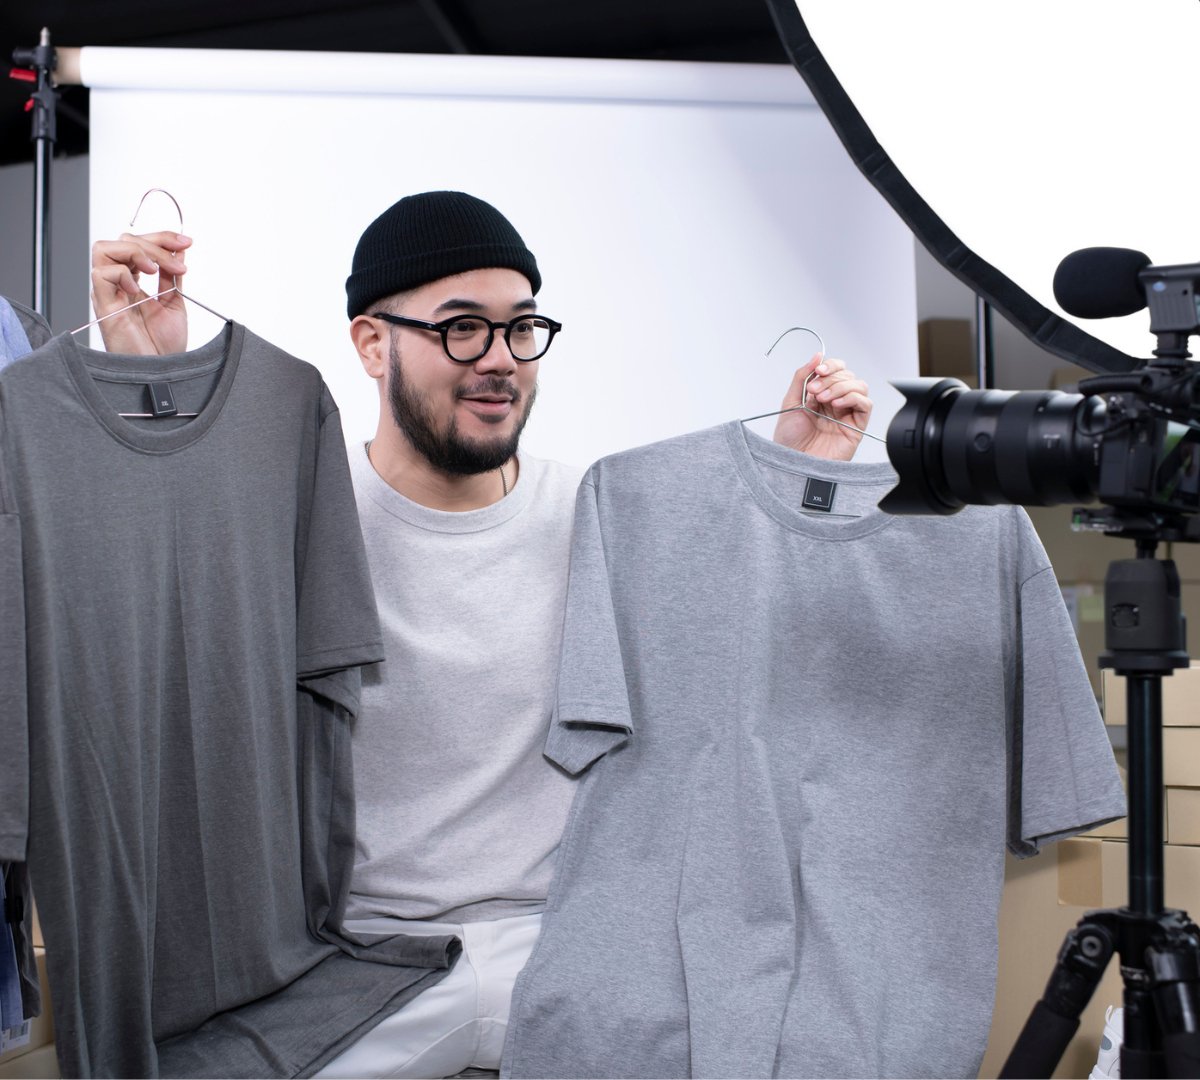 How to Use Videos to Promote Your New T-Shirt Business - Threadsy